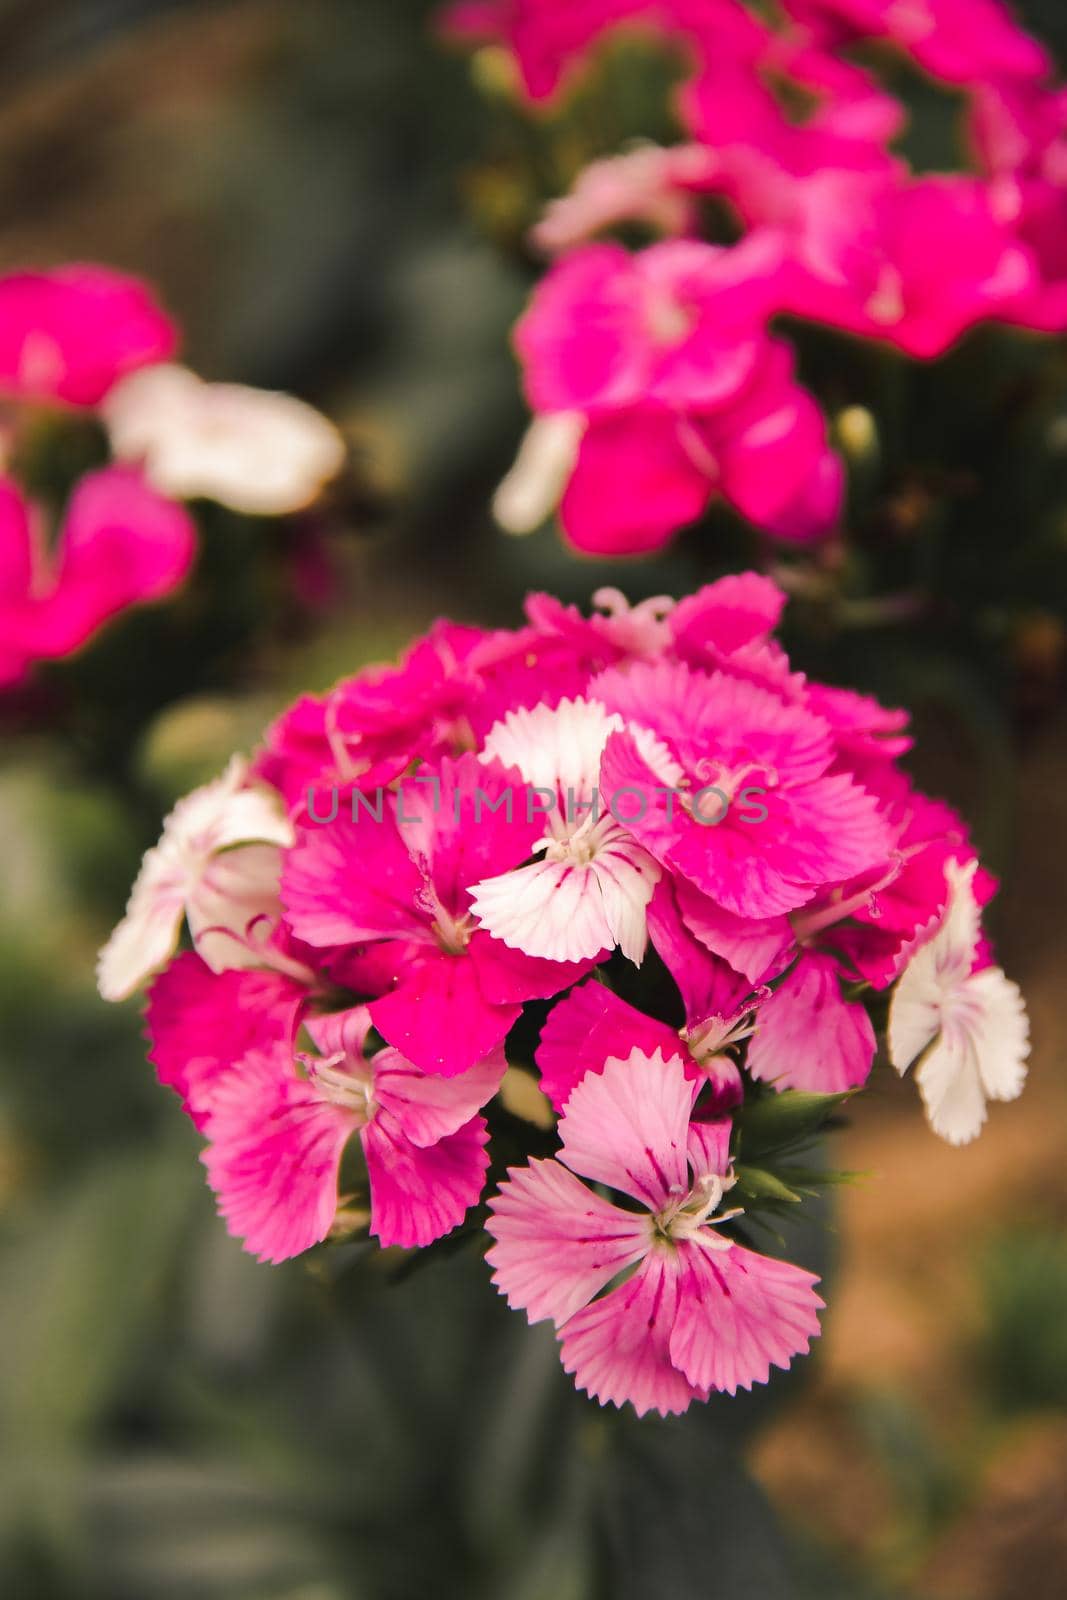 Dianthus is a genus of carnations with beautiful, eye-catching flowers.